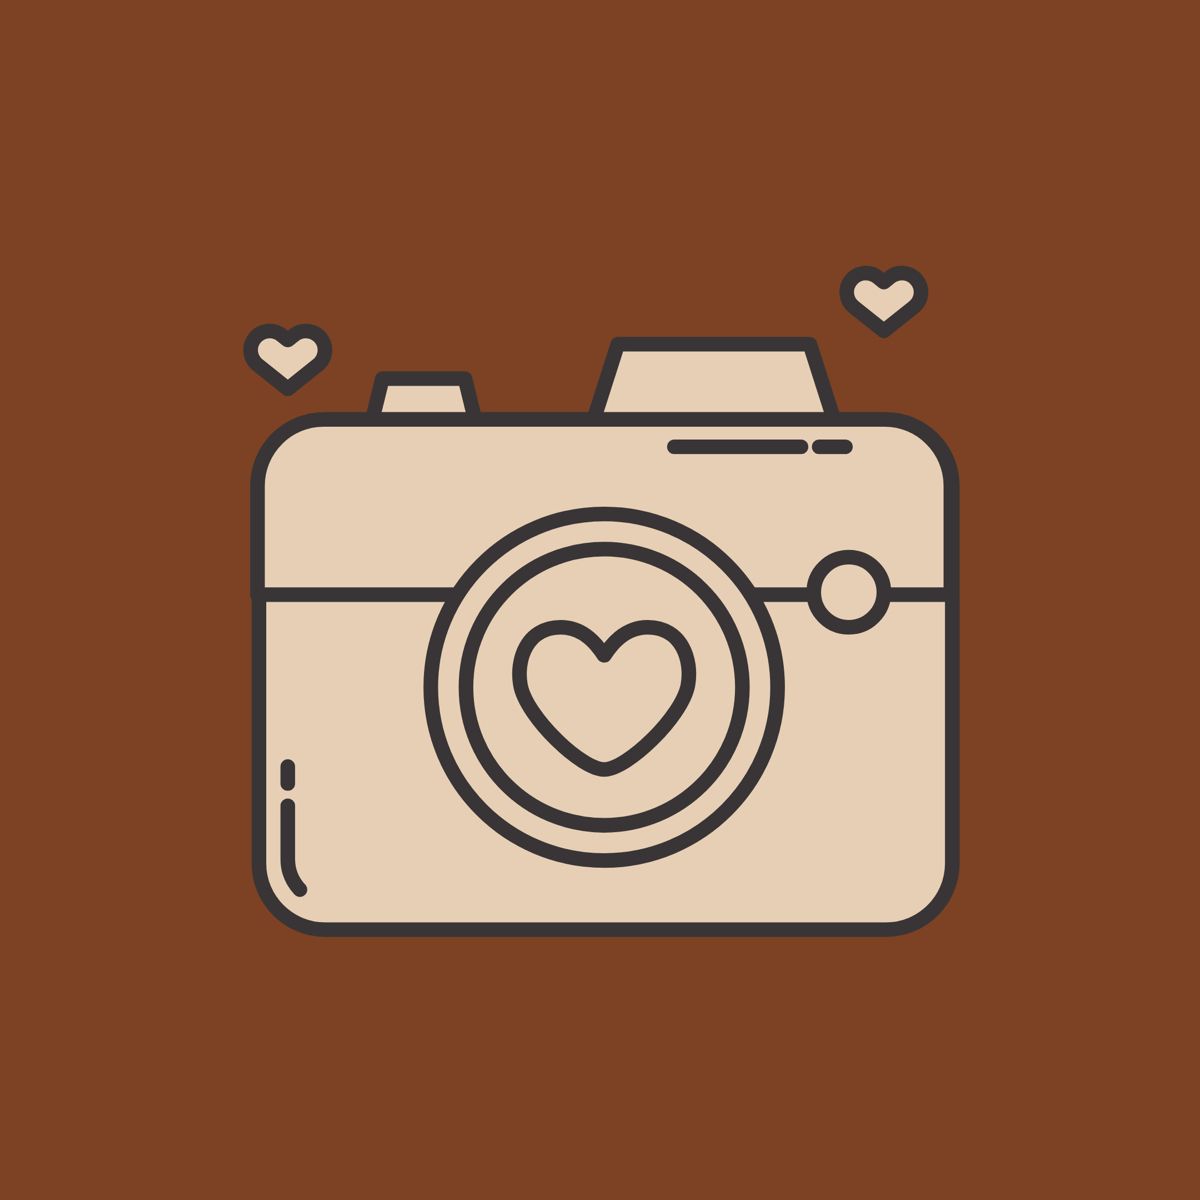 Camera Icon Aesthetic: How to Get Colourful Aesthetic Camera Icon for IOS